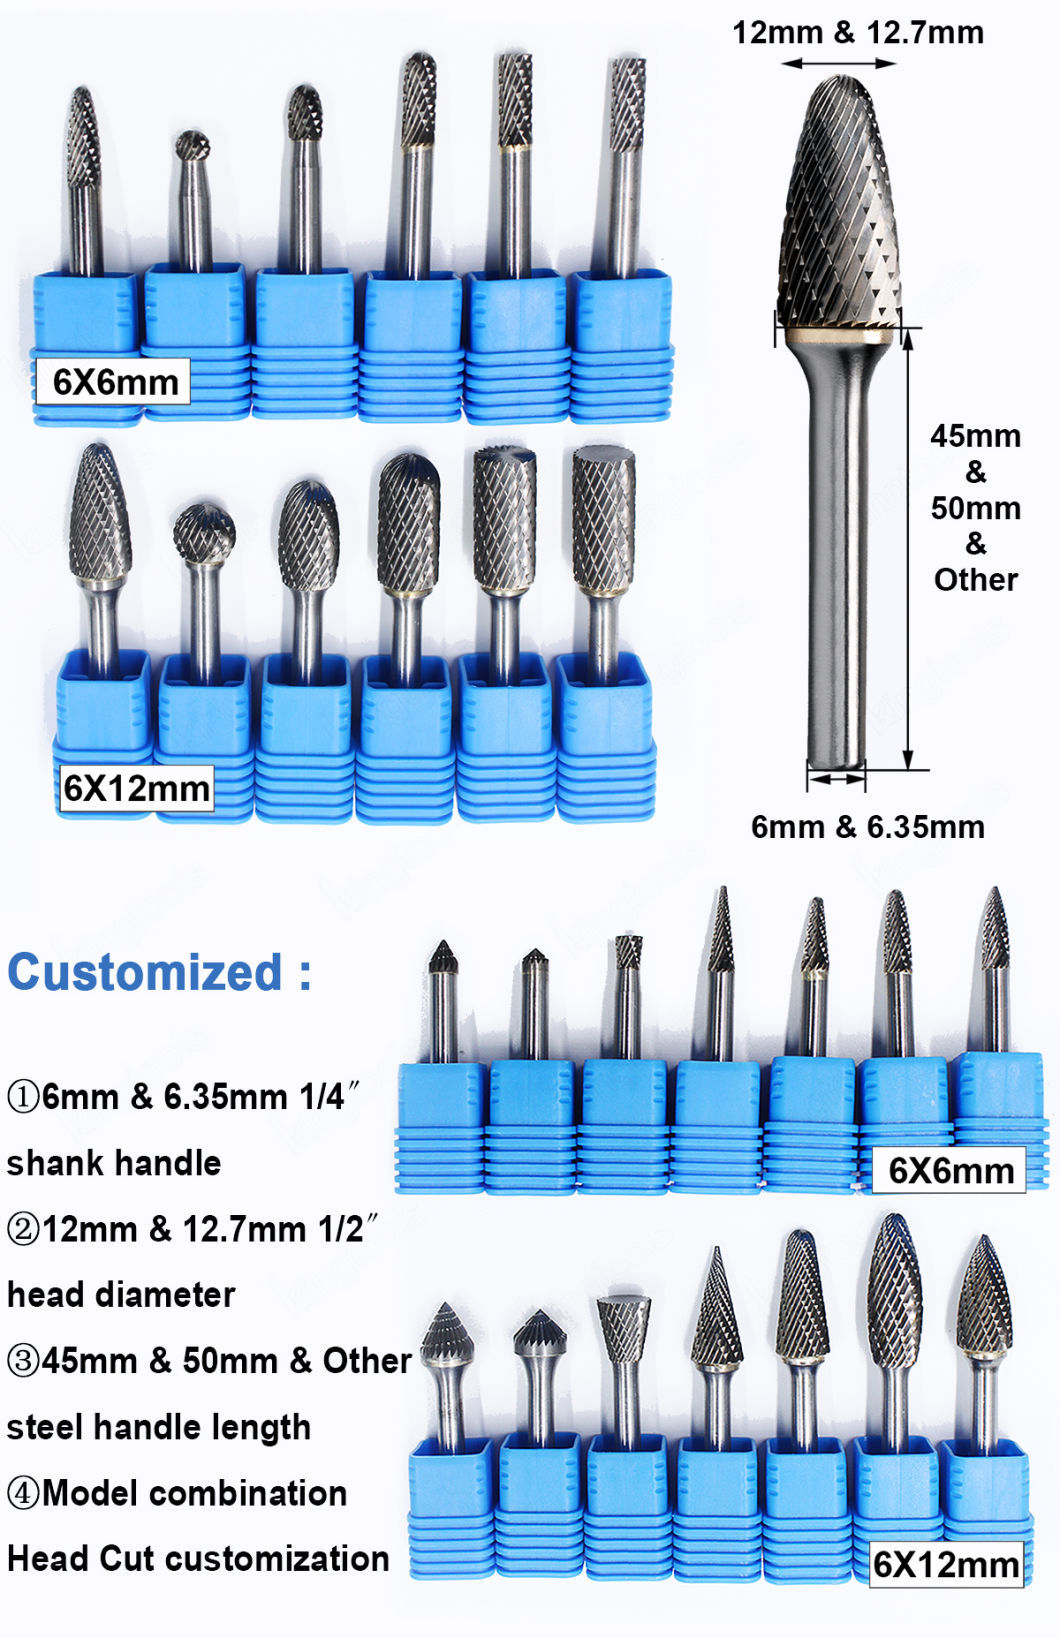 6mm 6.35mm Shank Solid Cutting Tools Tungsten Burs Rotary Set 1/4inch Diameter Double Cut Carbide Burr